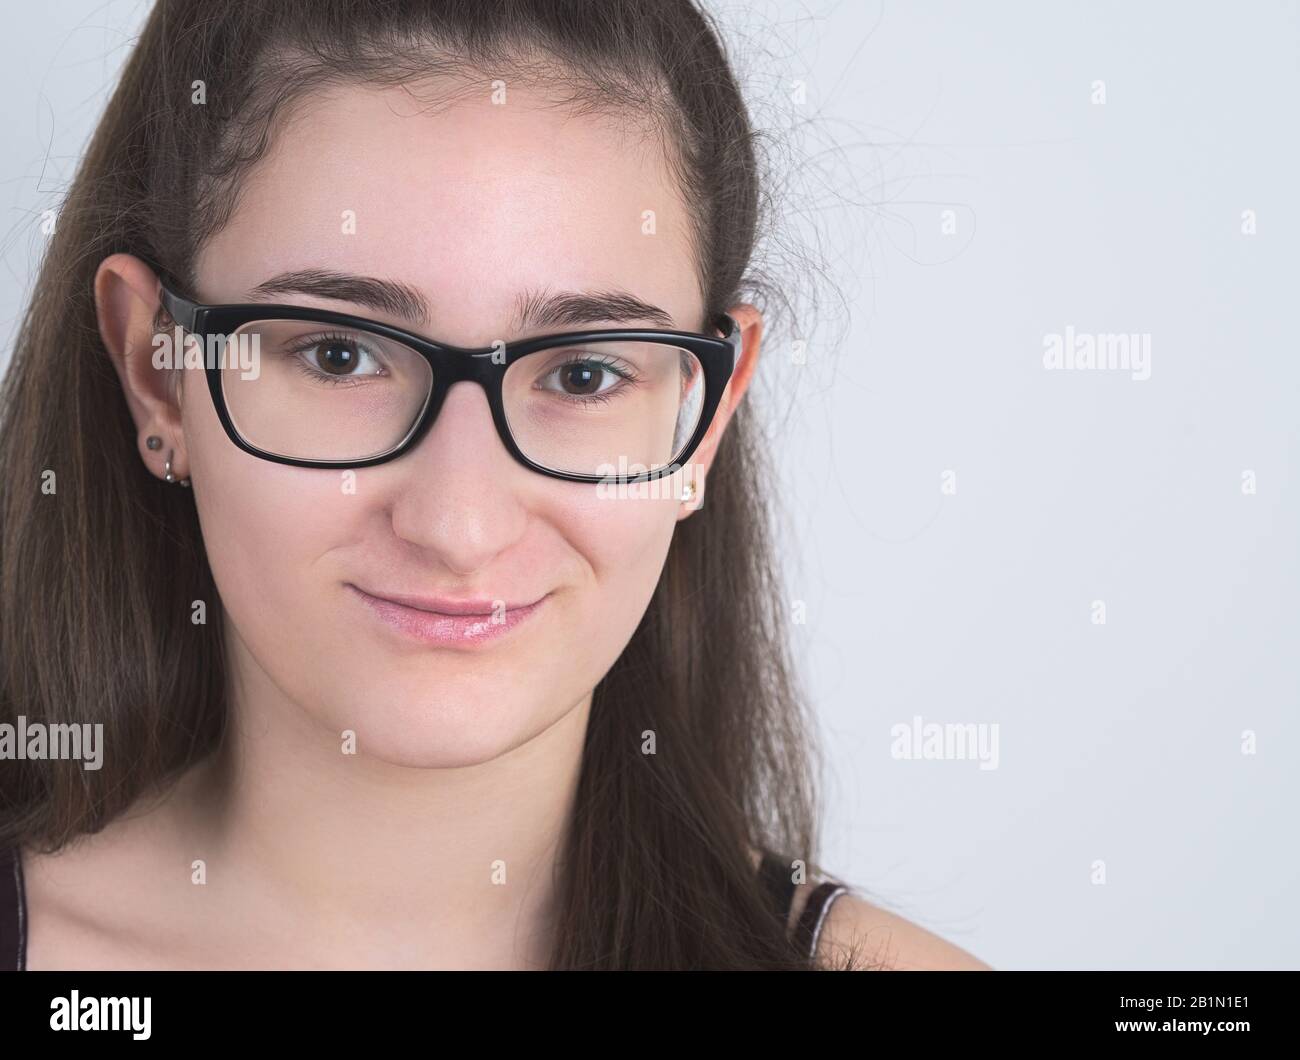 Portrait of a Smiling Bespectacled Long-haired Brunette Teen Girl Stock Photo